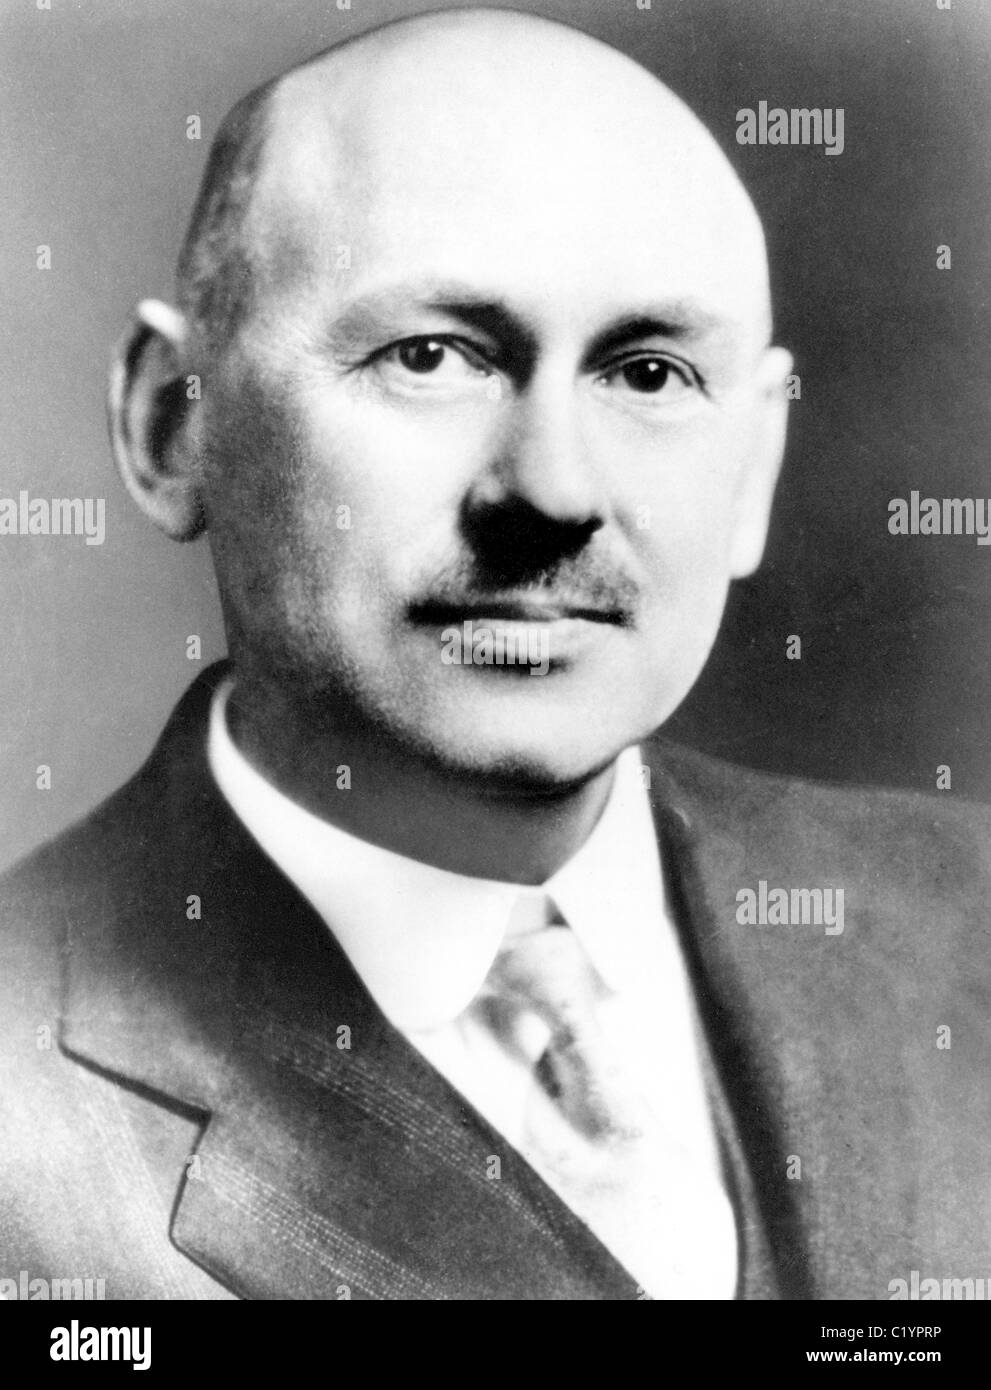 Dr. Robert Hutchings Goddard. American professor, physicist and inventor who is credited with creating and building the world's first liquid-fueled rocket Stock Photo